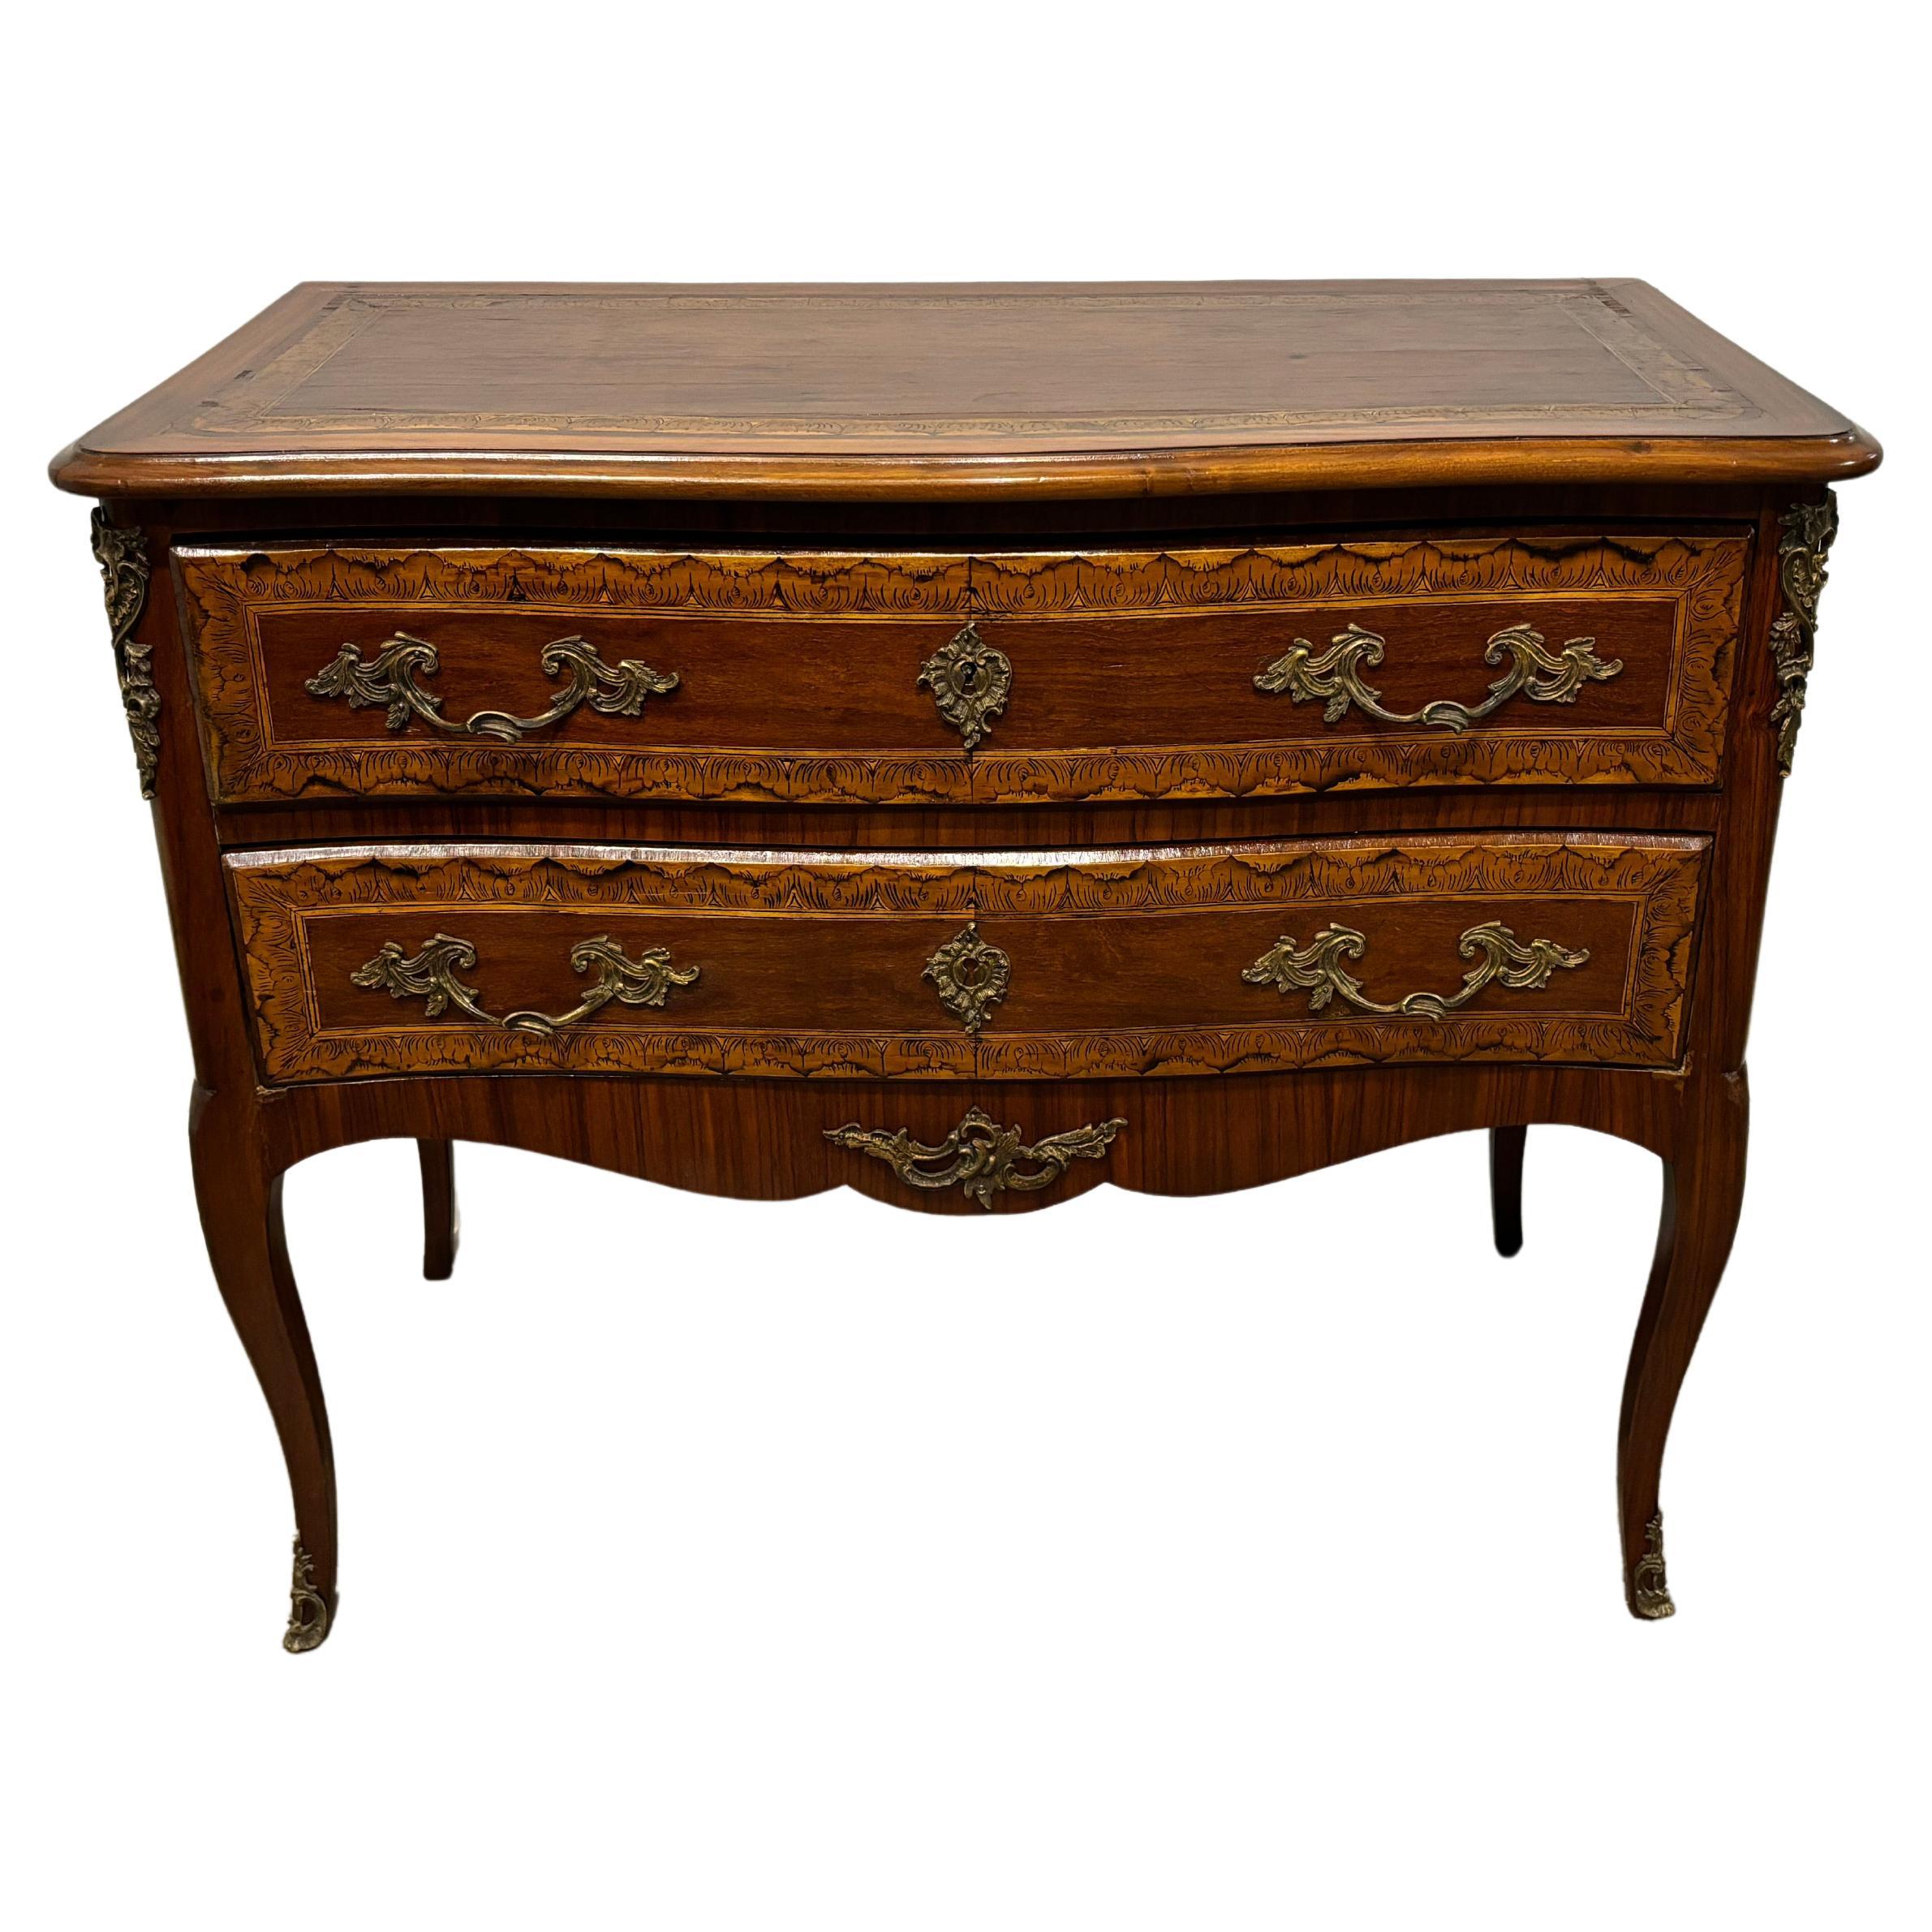 French 18th Century Commode Sauteuse